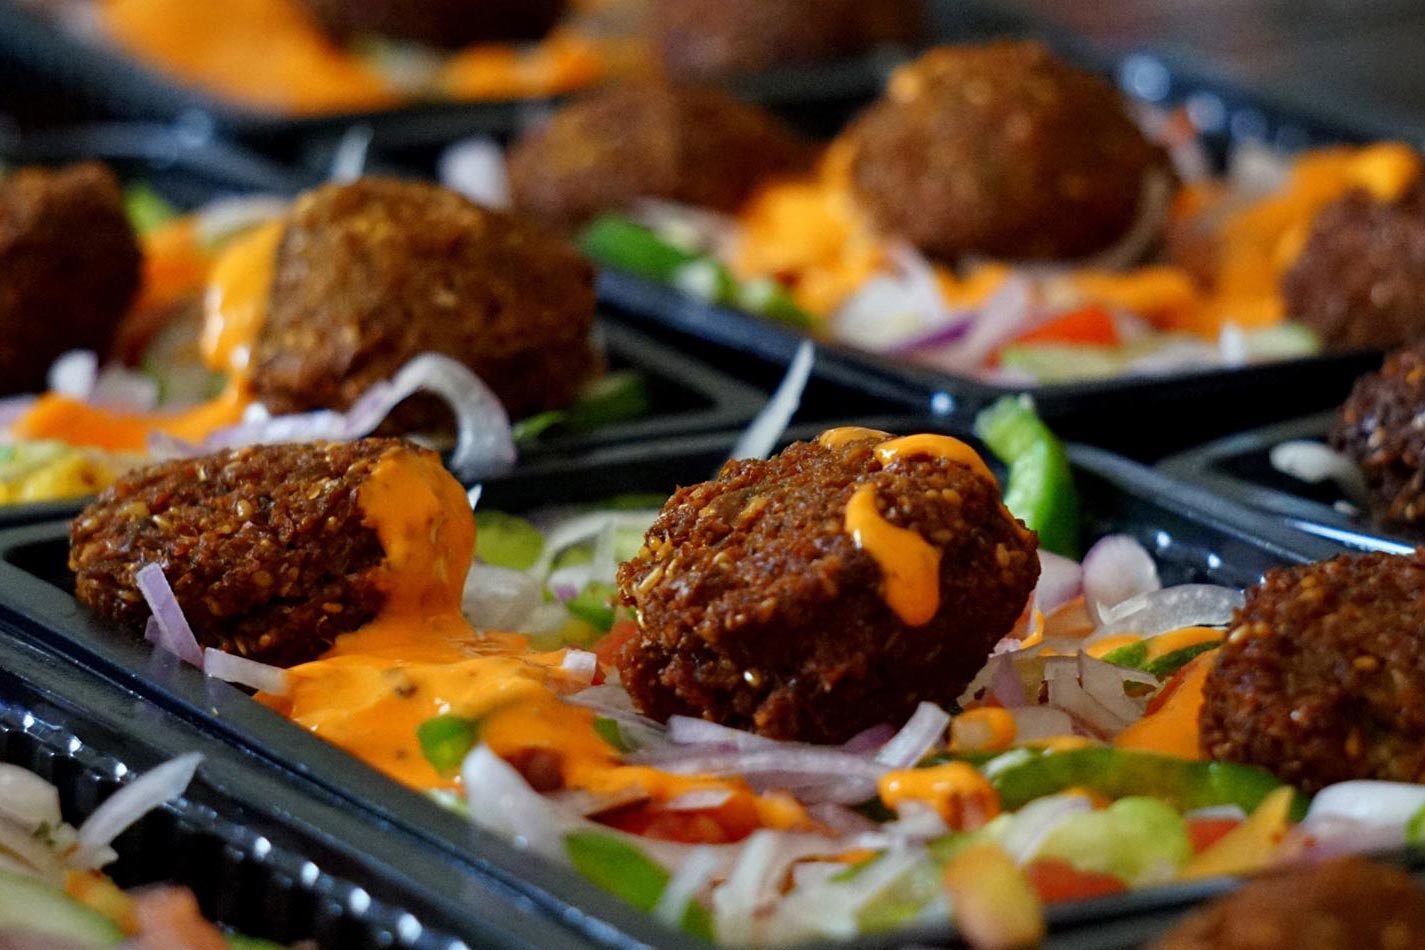 Up close view of a salad with falafel on them